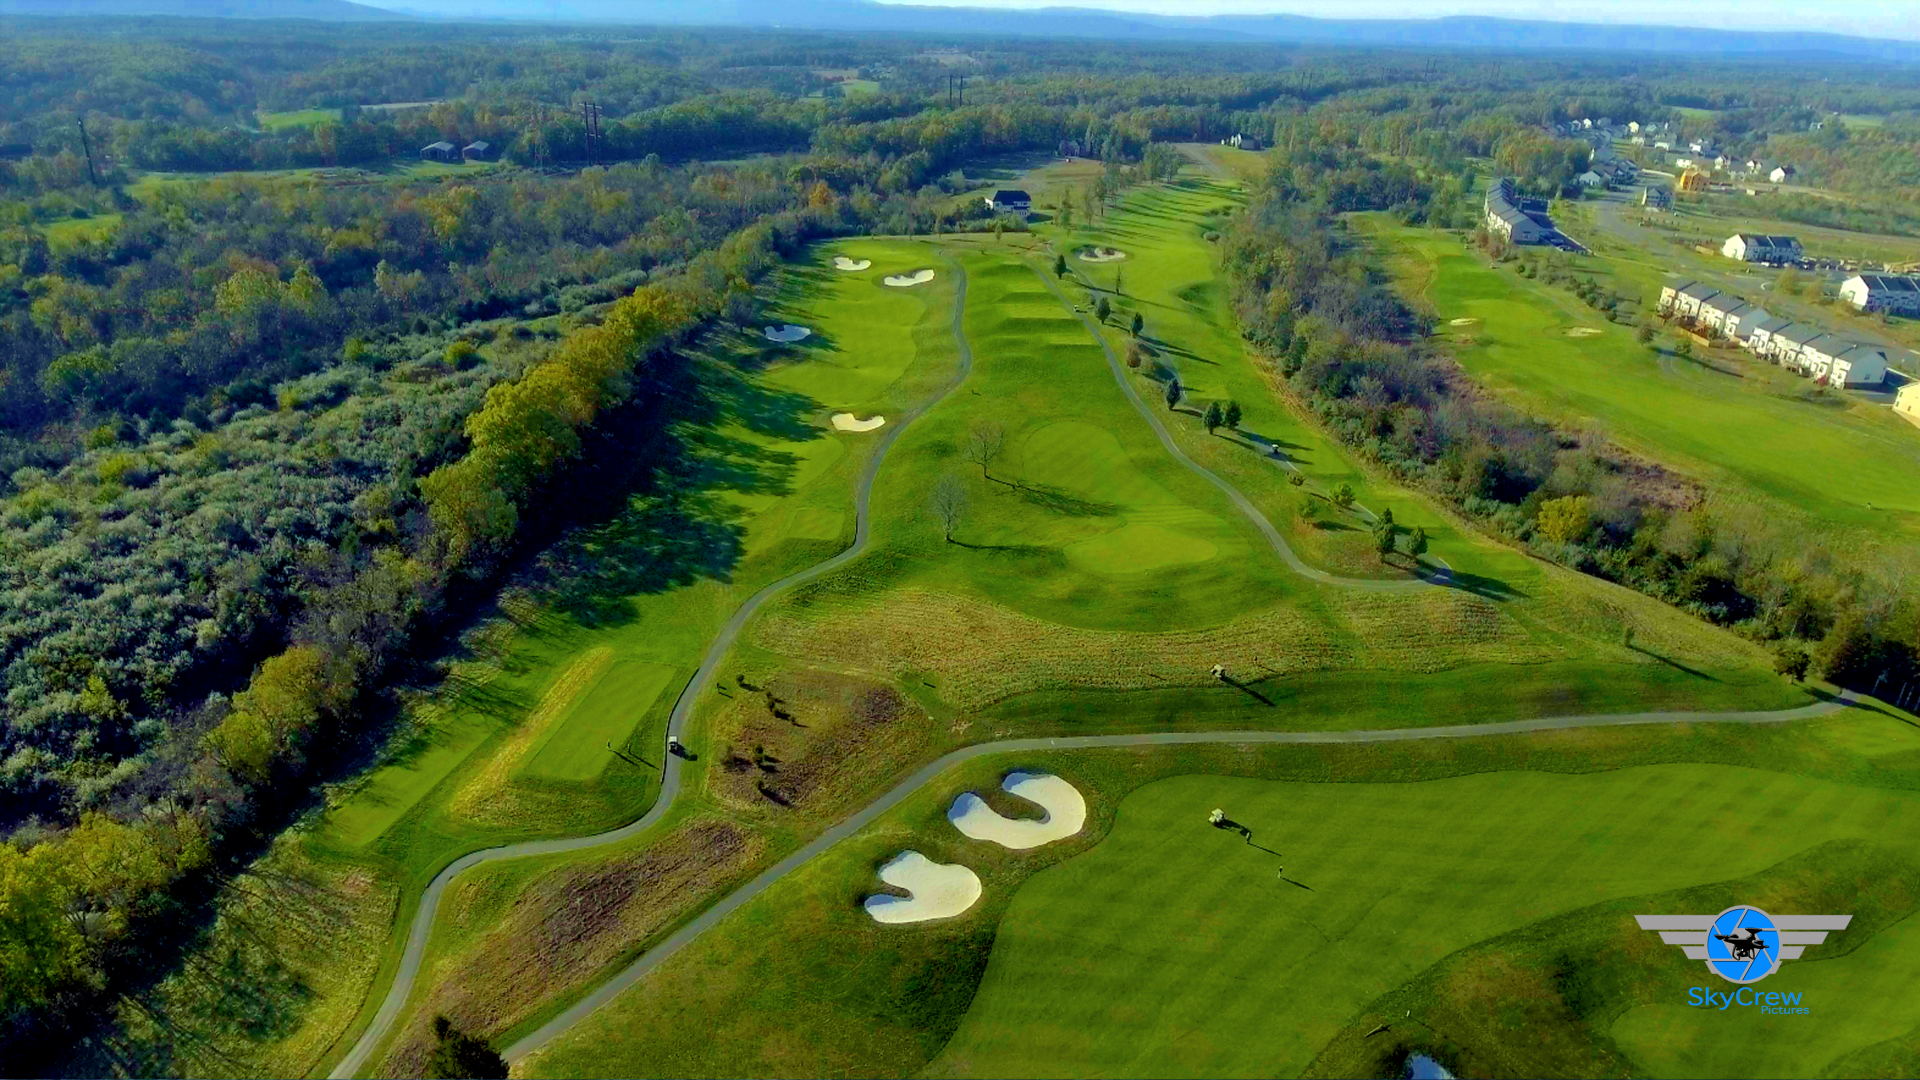 Aerial view of Golf course